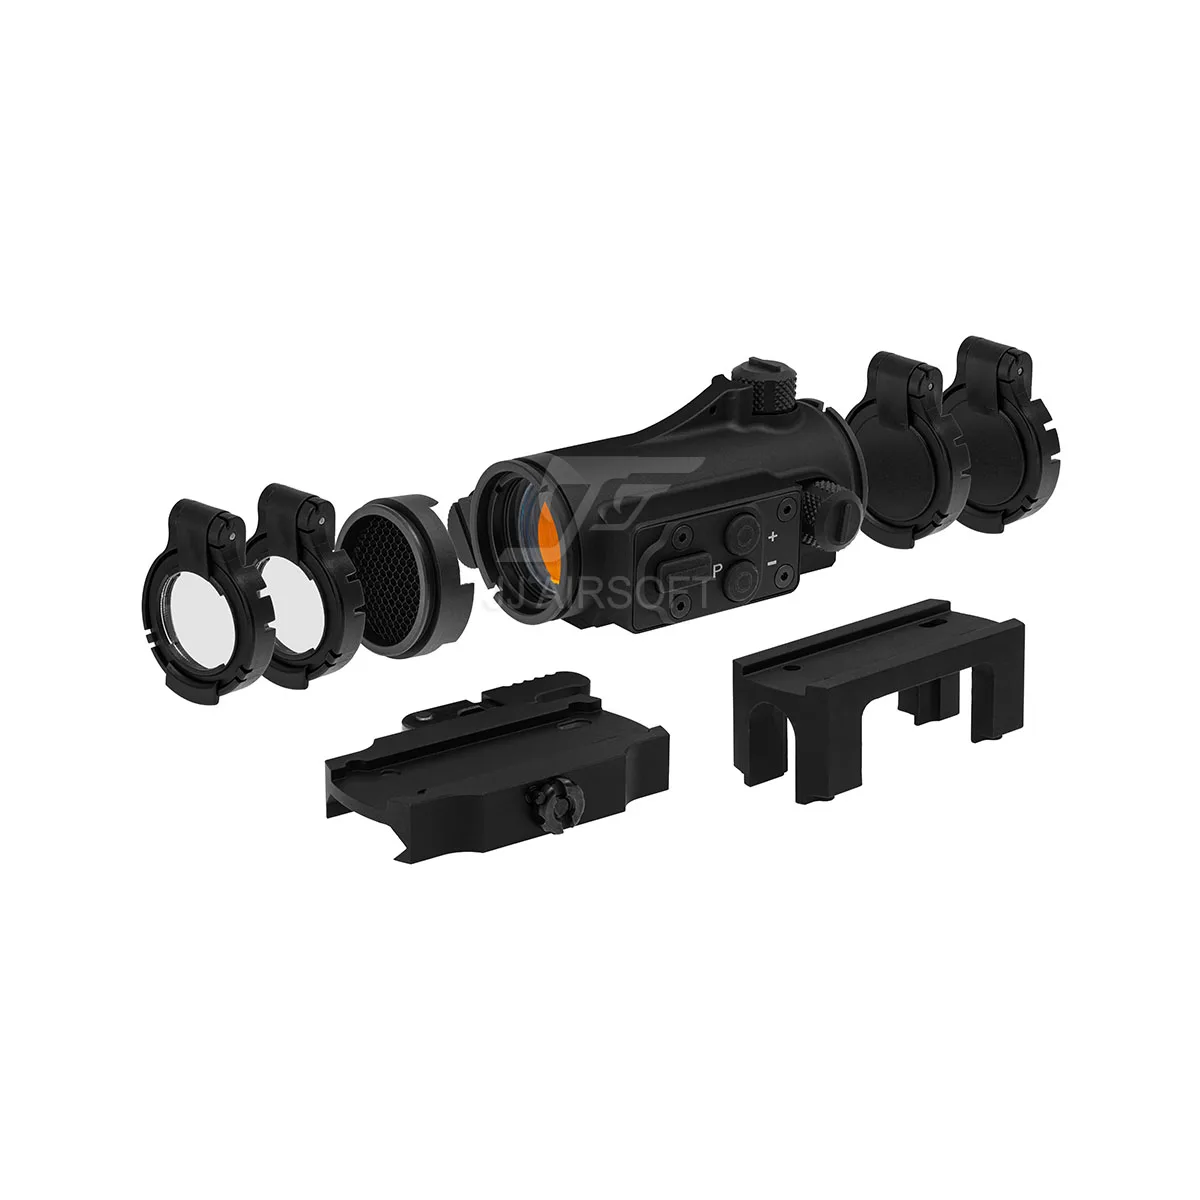 

JJ Airsoft ZV-1 ZVOR-1 Red Dot Sight with Low Mount and Riser FOR AK SKS SVD